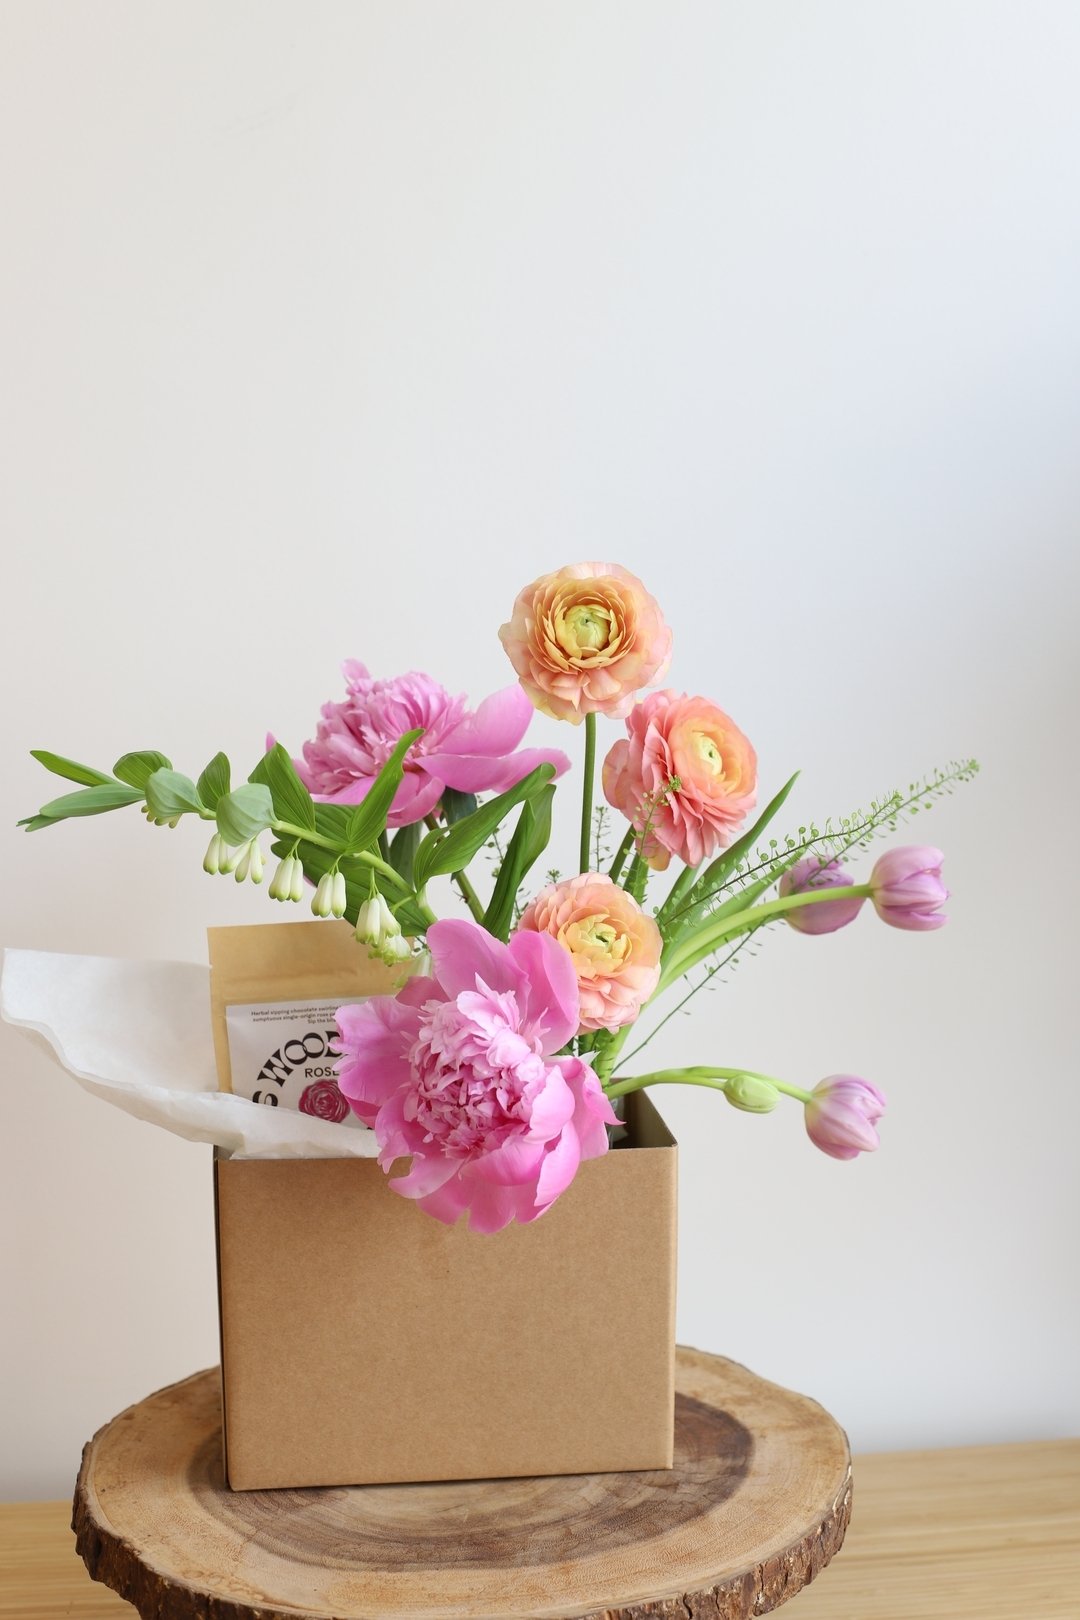 We're so excited to be collaborating with @theverdantmaiden this Mother's Day! 

Check out the online shop to order these Mother's Day exclusive bundles! 

#shopsmall #shopwomenowned #mothersdaygifts #peonyseason #somervilleflorist #bostonflorist #ca